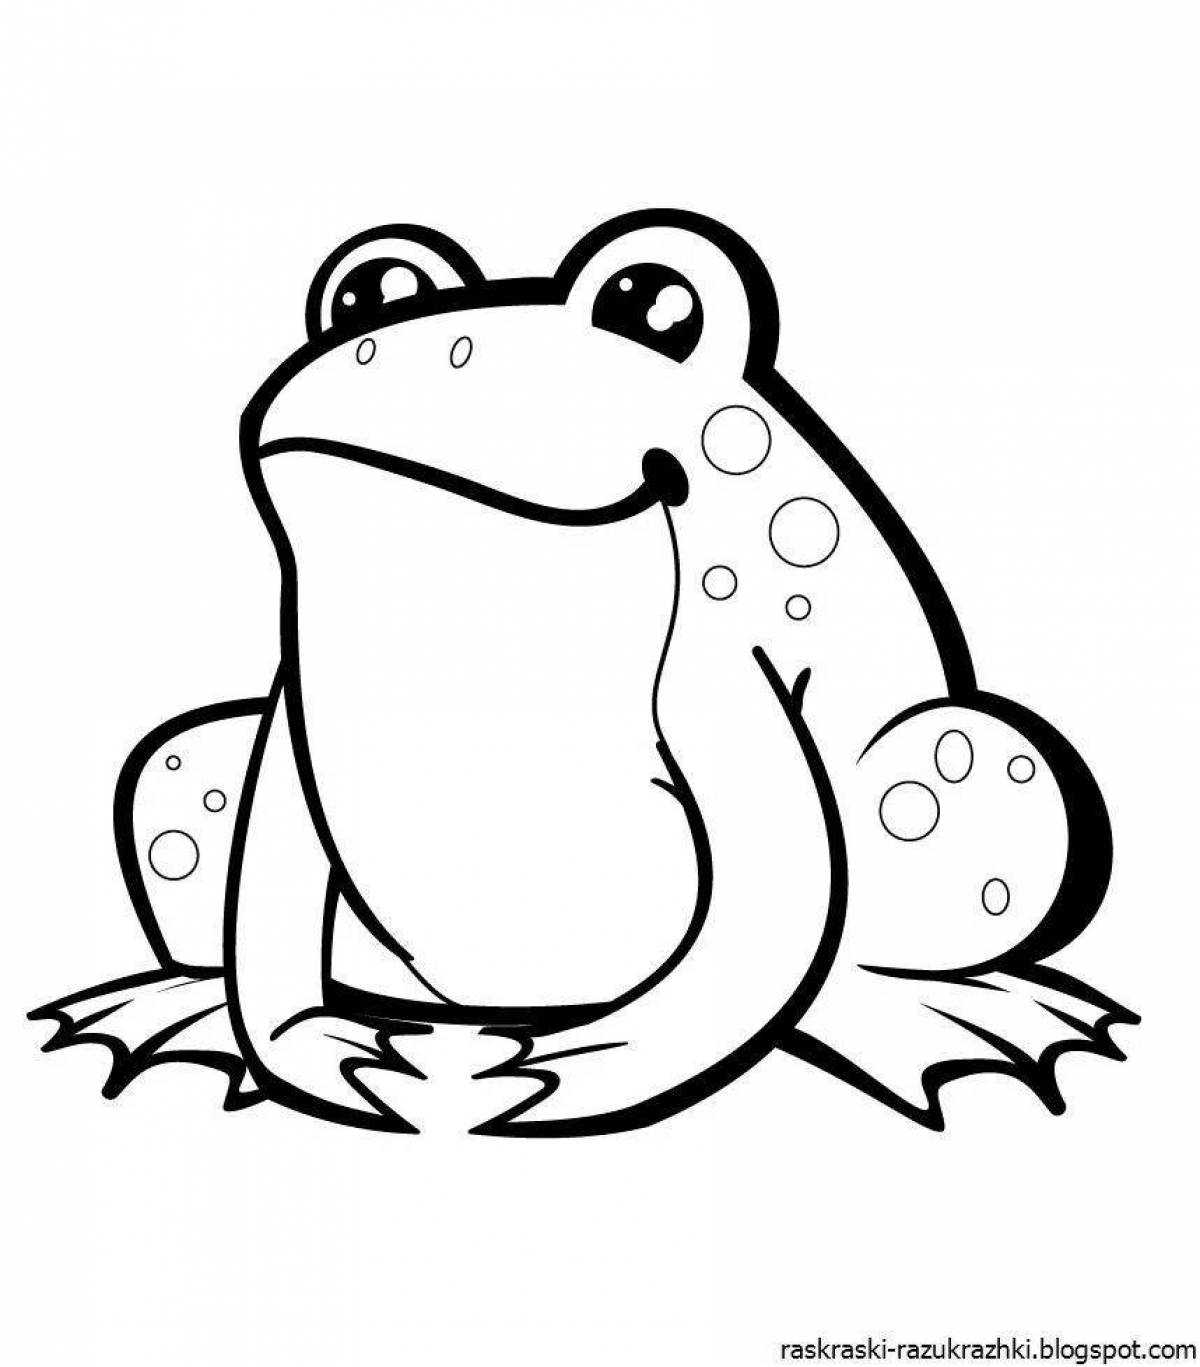 Coloring frog for kids